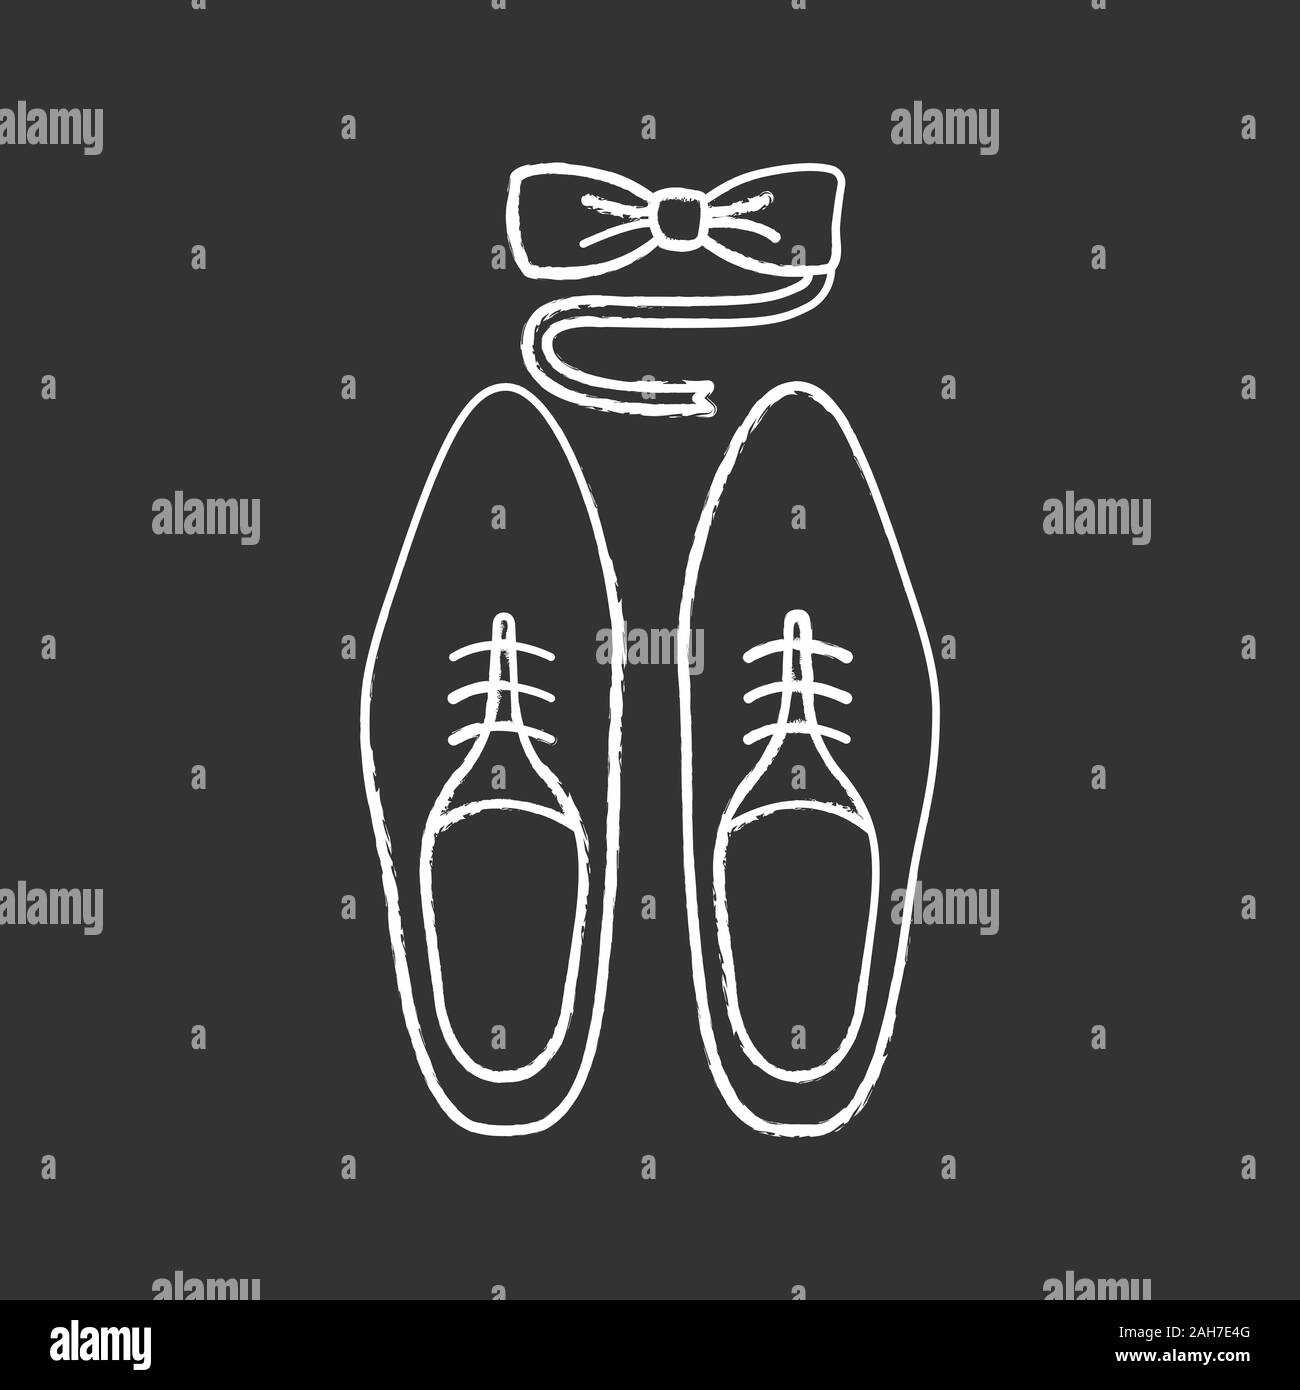 Mens accessories chalk icon. Dress code. Menswear. Men’s style and fashion. Shoes and tuxedo bow tie. Isolated vector chalkboard illustration Stock Vector